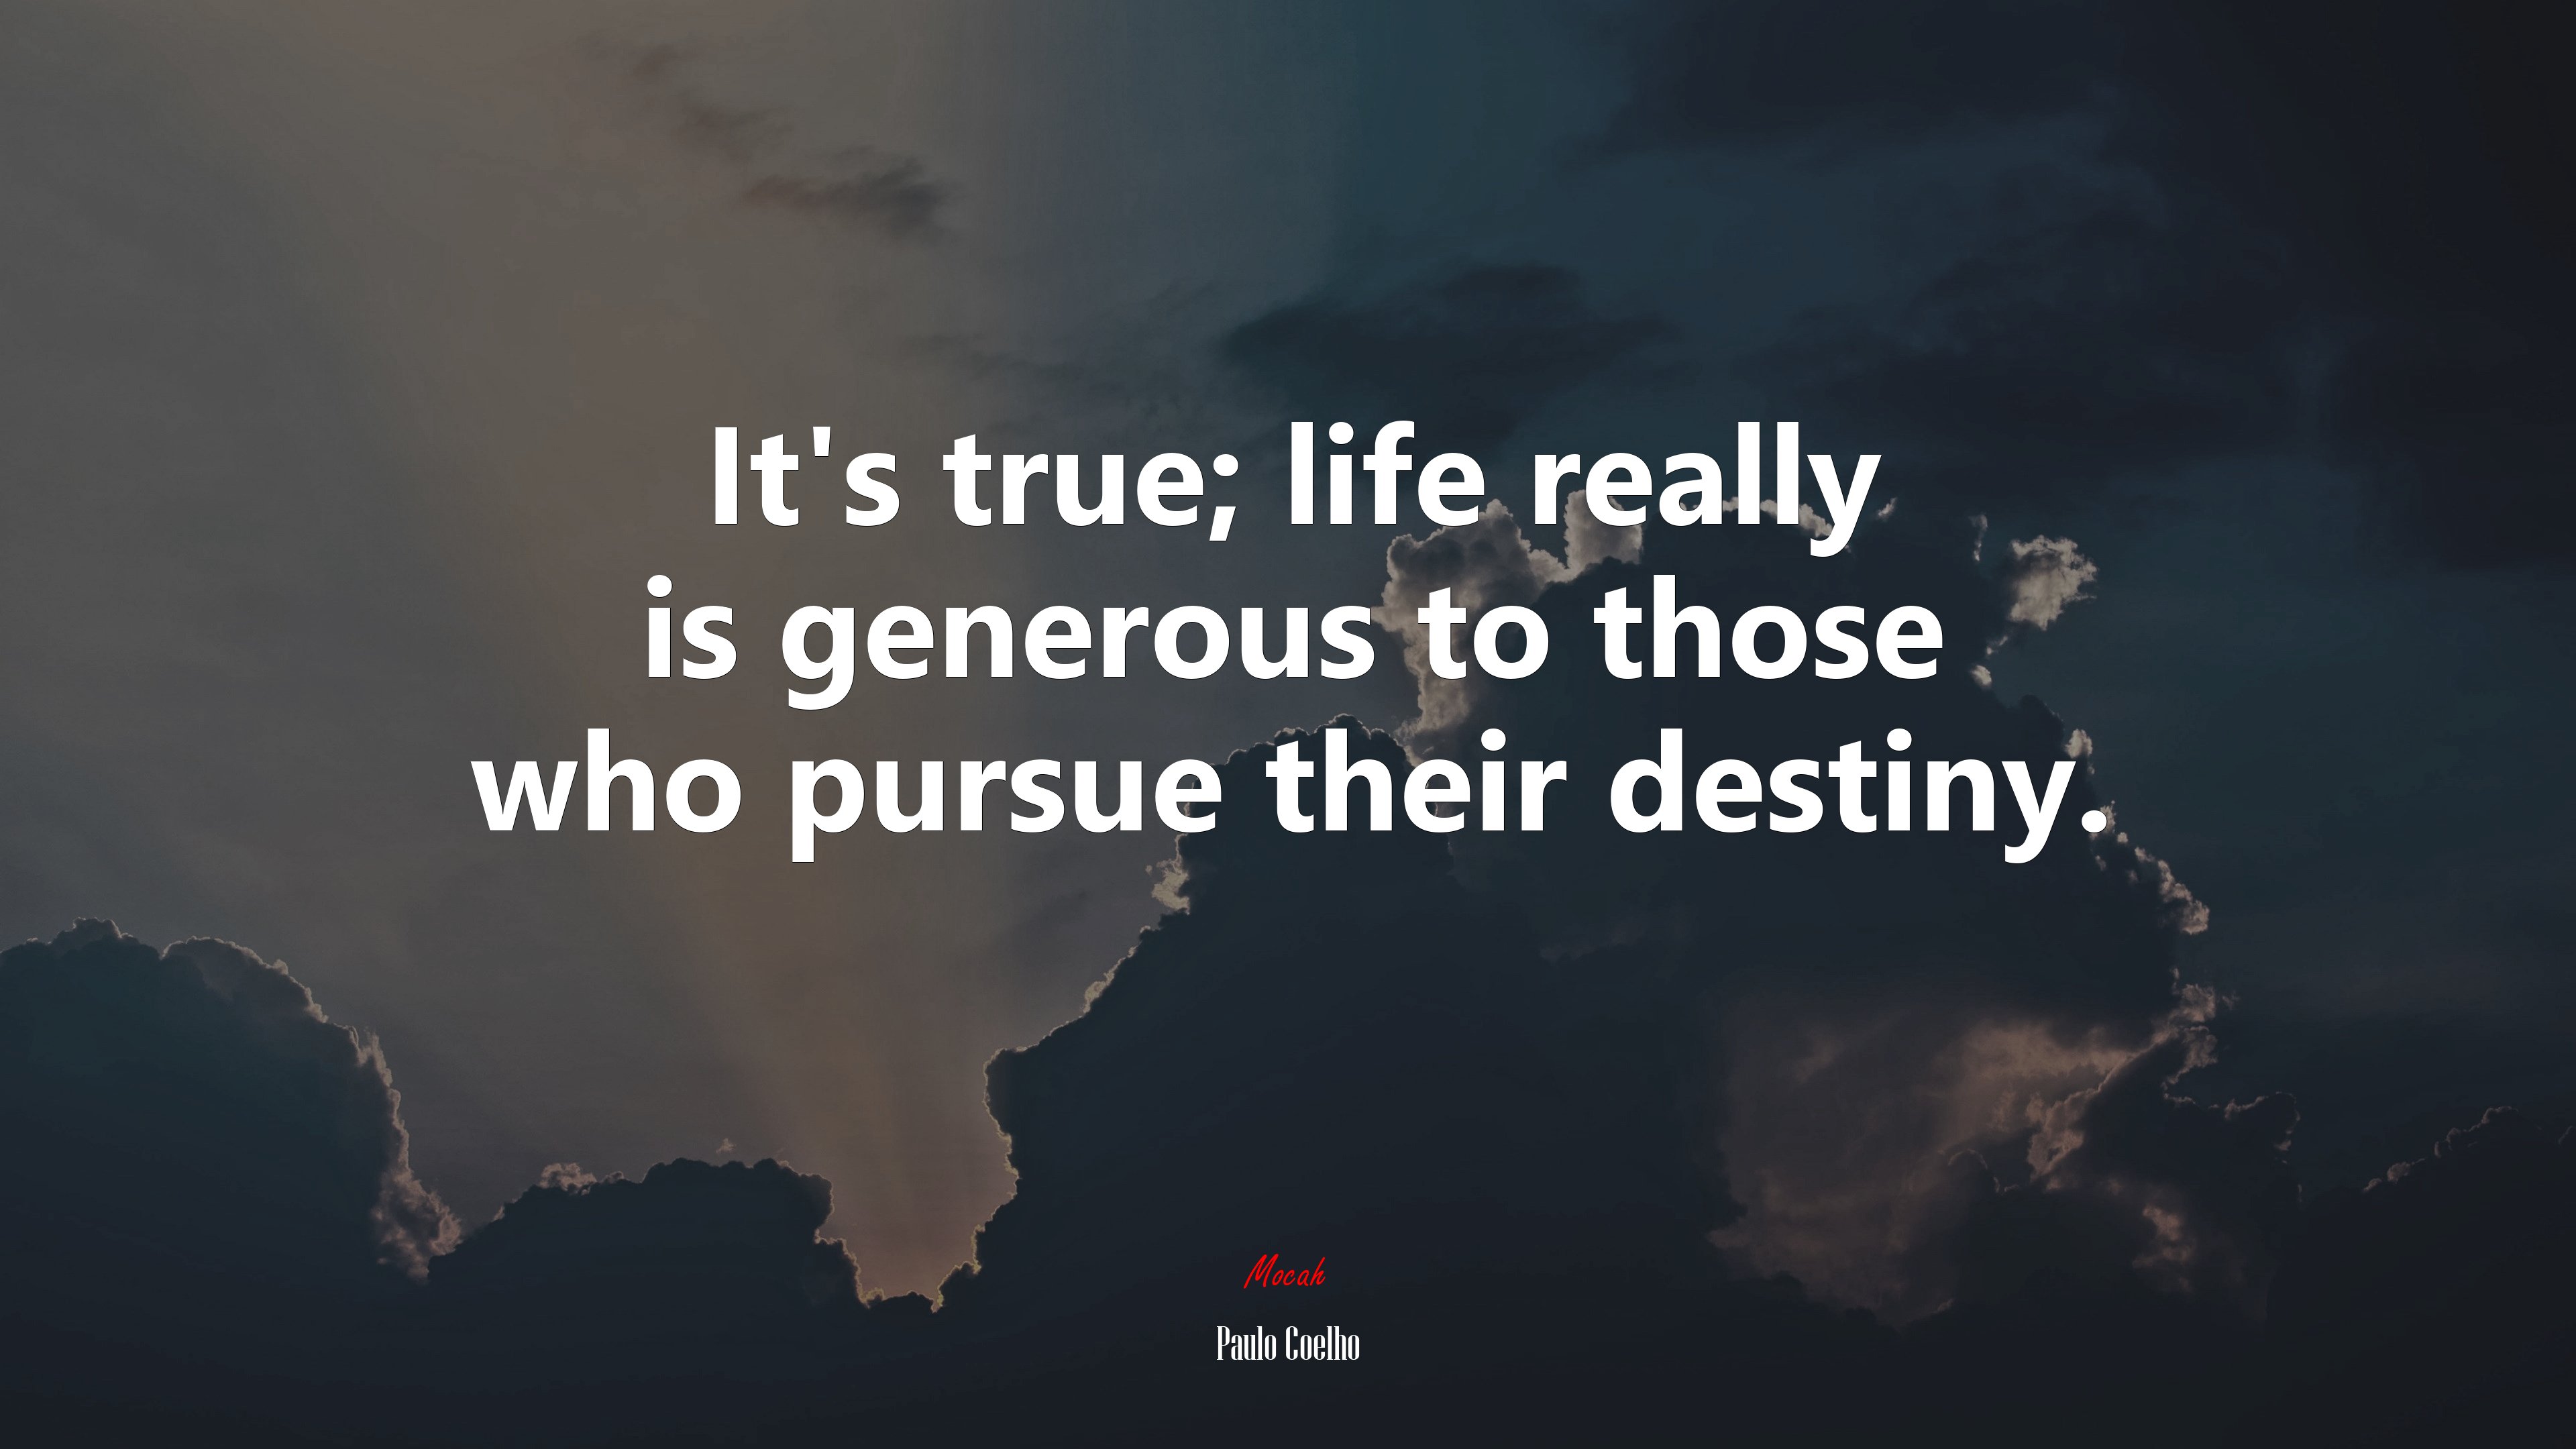 It's true; life really is generous to those who pursue their destiny. Paulo Coelho quote Gallery HD Wallpaper